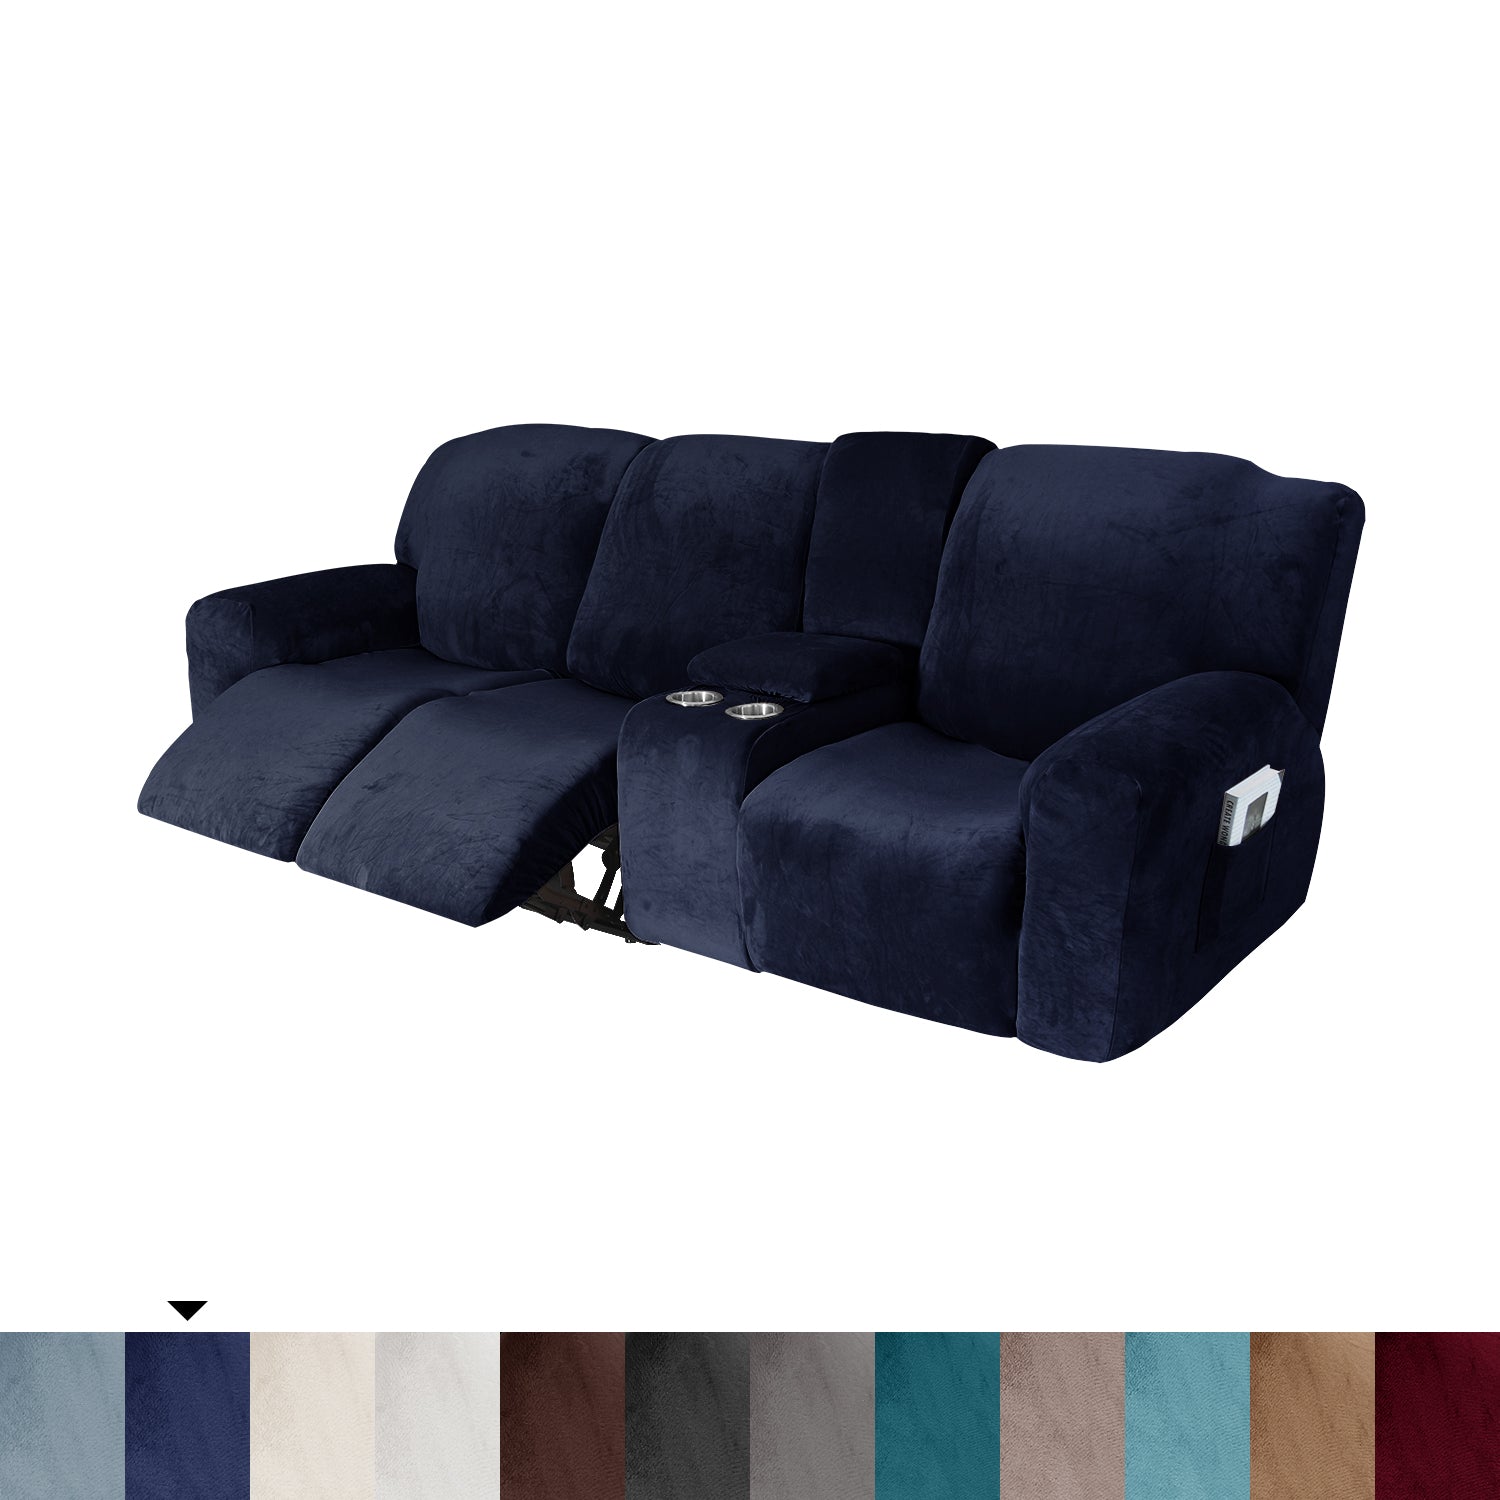 3 Seats Easy-Going Recliner Cover with Cup Holders Non Slip Soft Sofa Slipcover Thick Soft Furniture Covers, 12 Colors